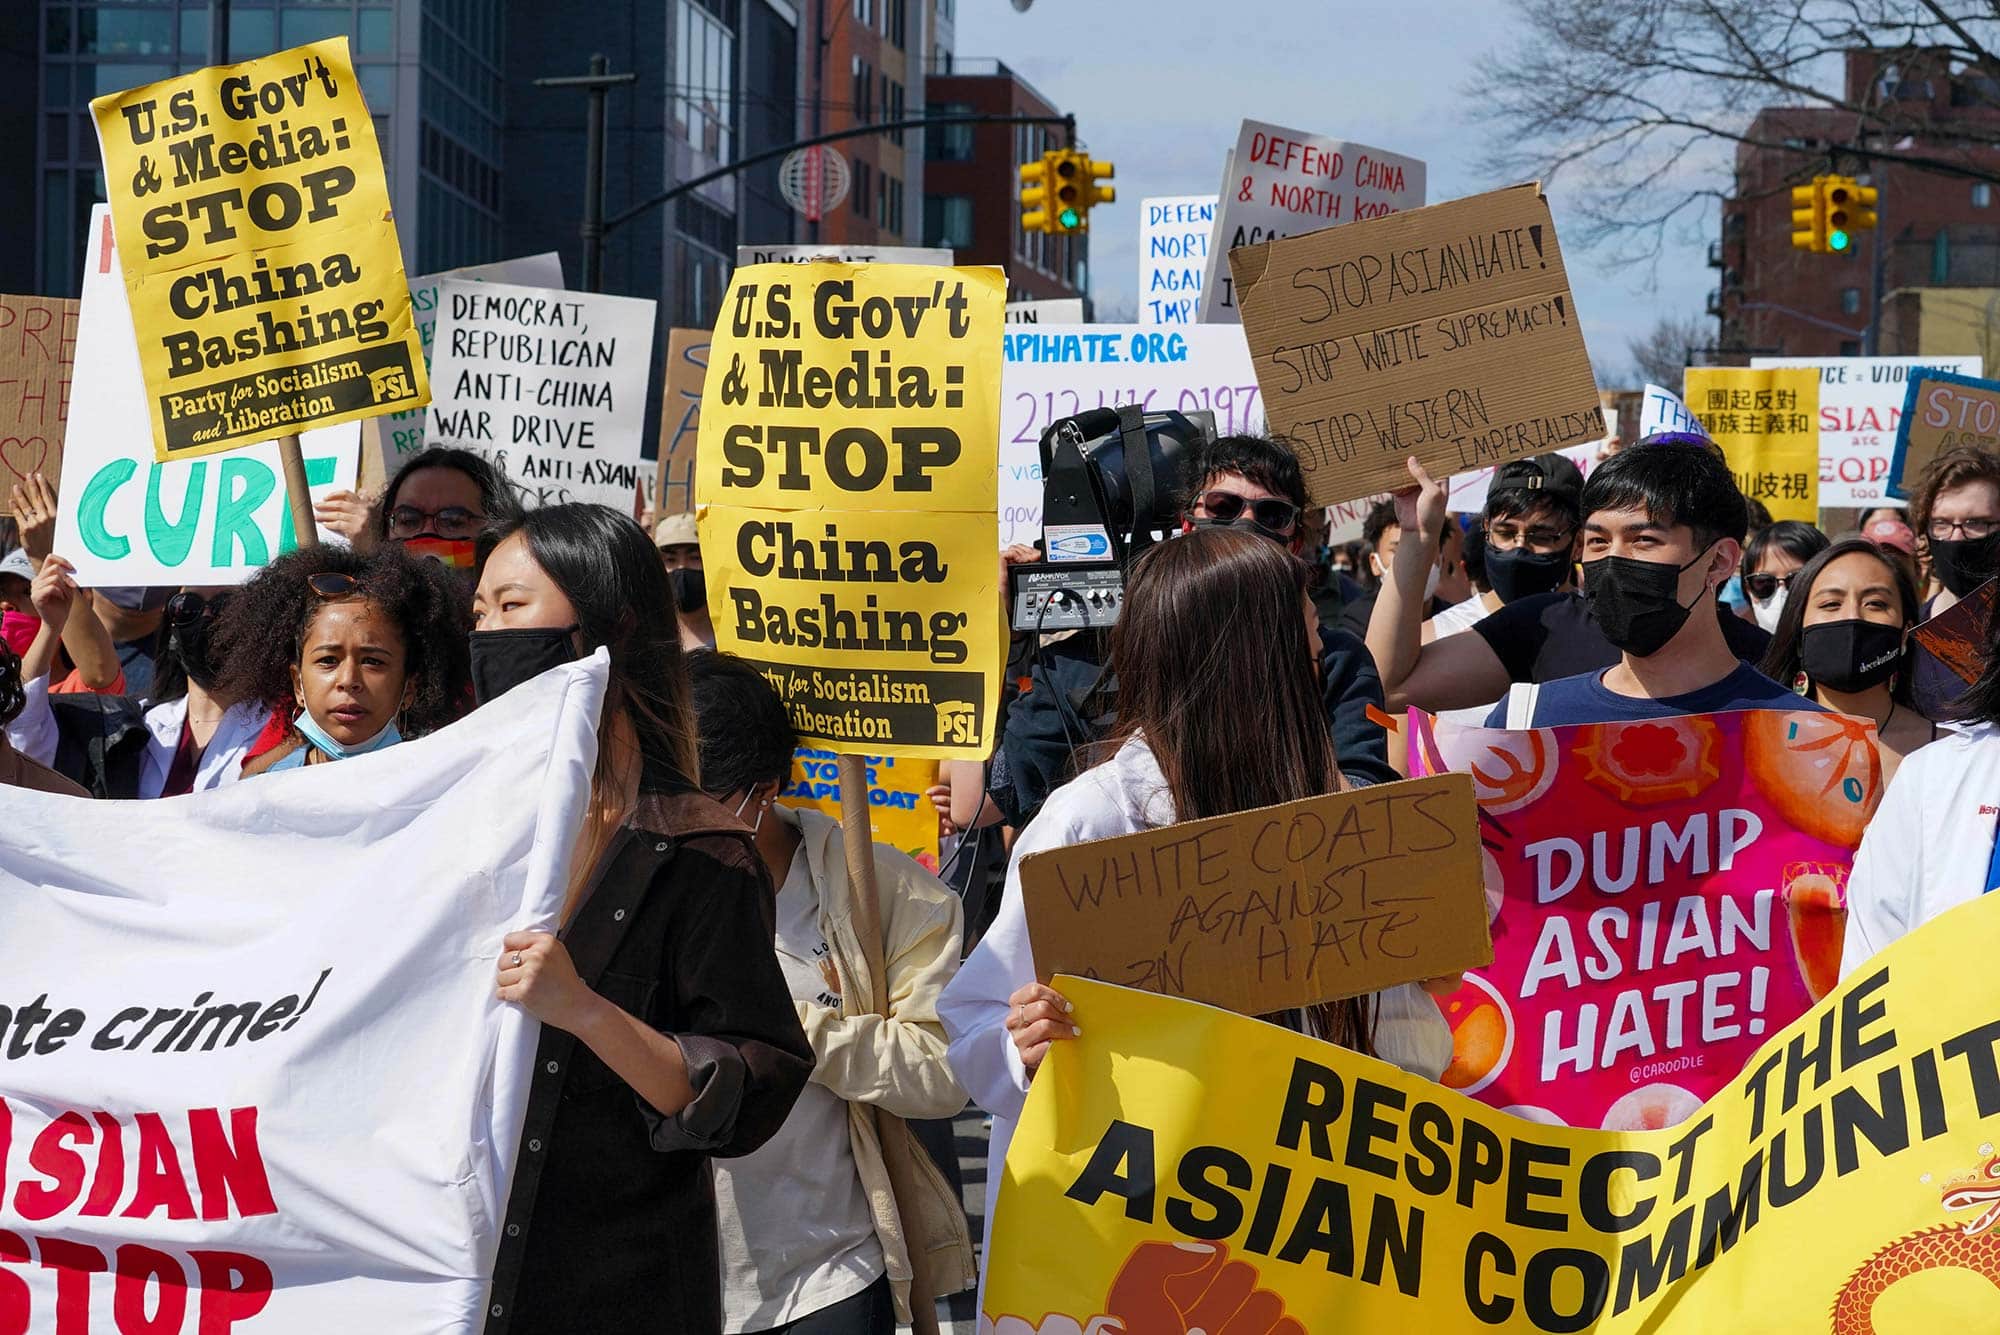 Demonstrators hold signs during an AANHPI Rally Against Hate in Flushing, Queens, New York. Photo: John Nacion/Star Max/IPX.